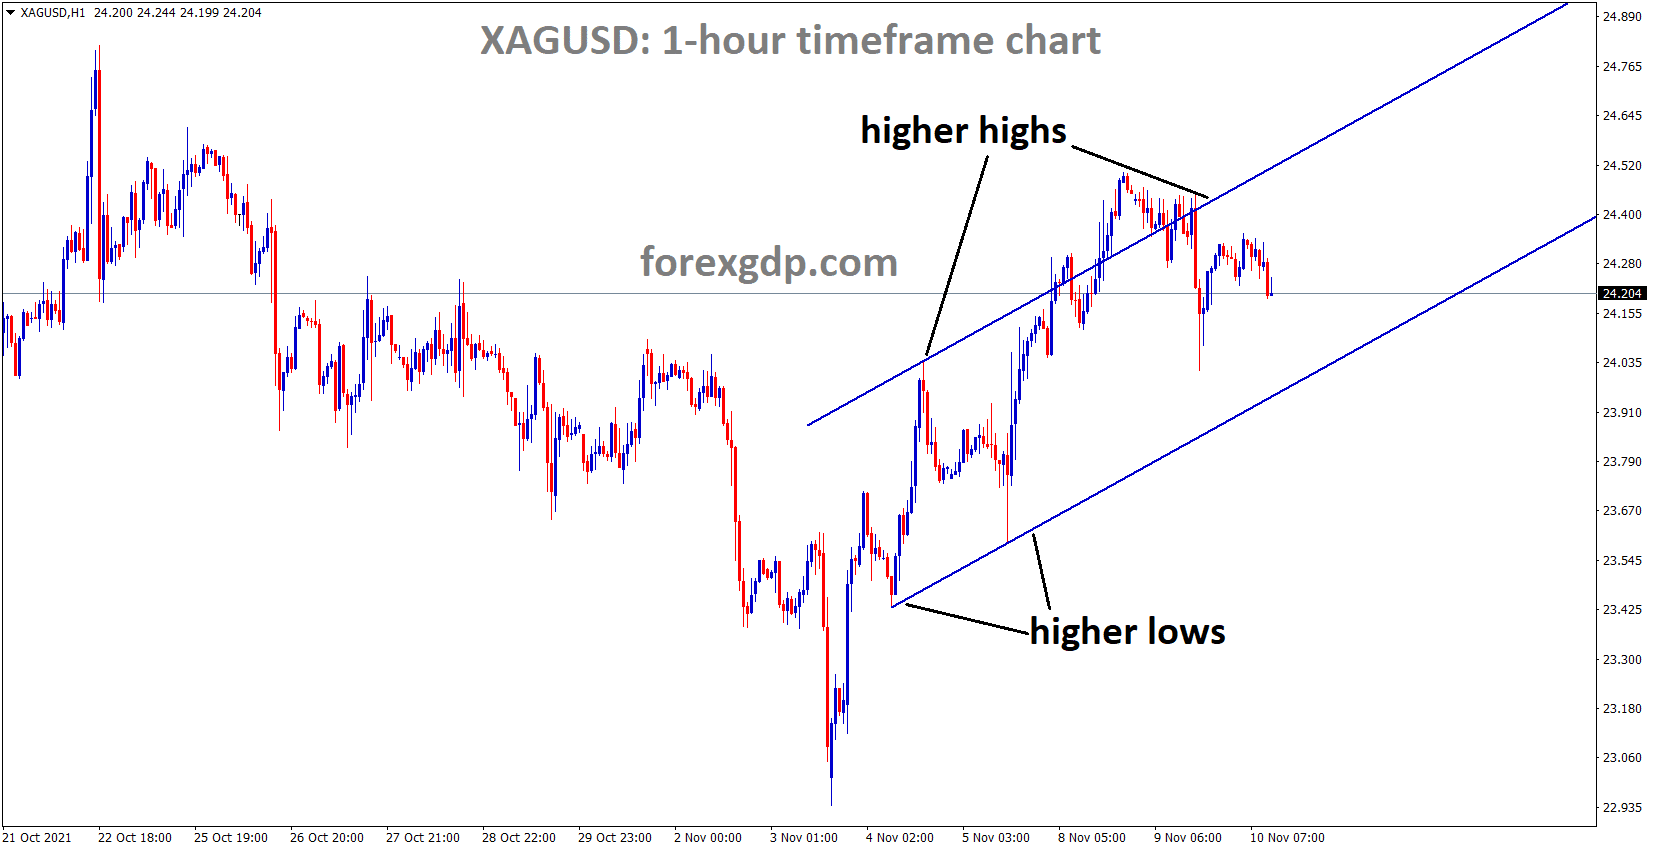 XAGUSD Silver price is moving in an ascending channel and market is fell from the recent higher high